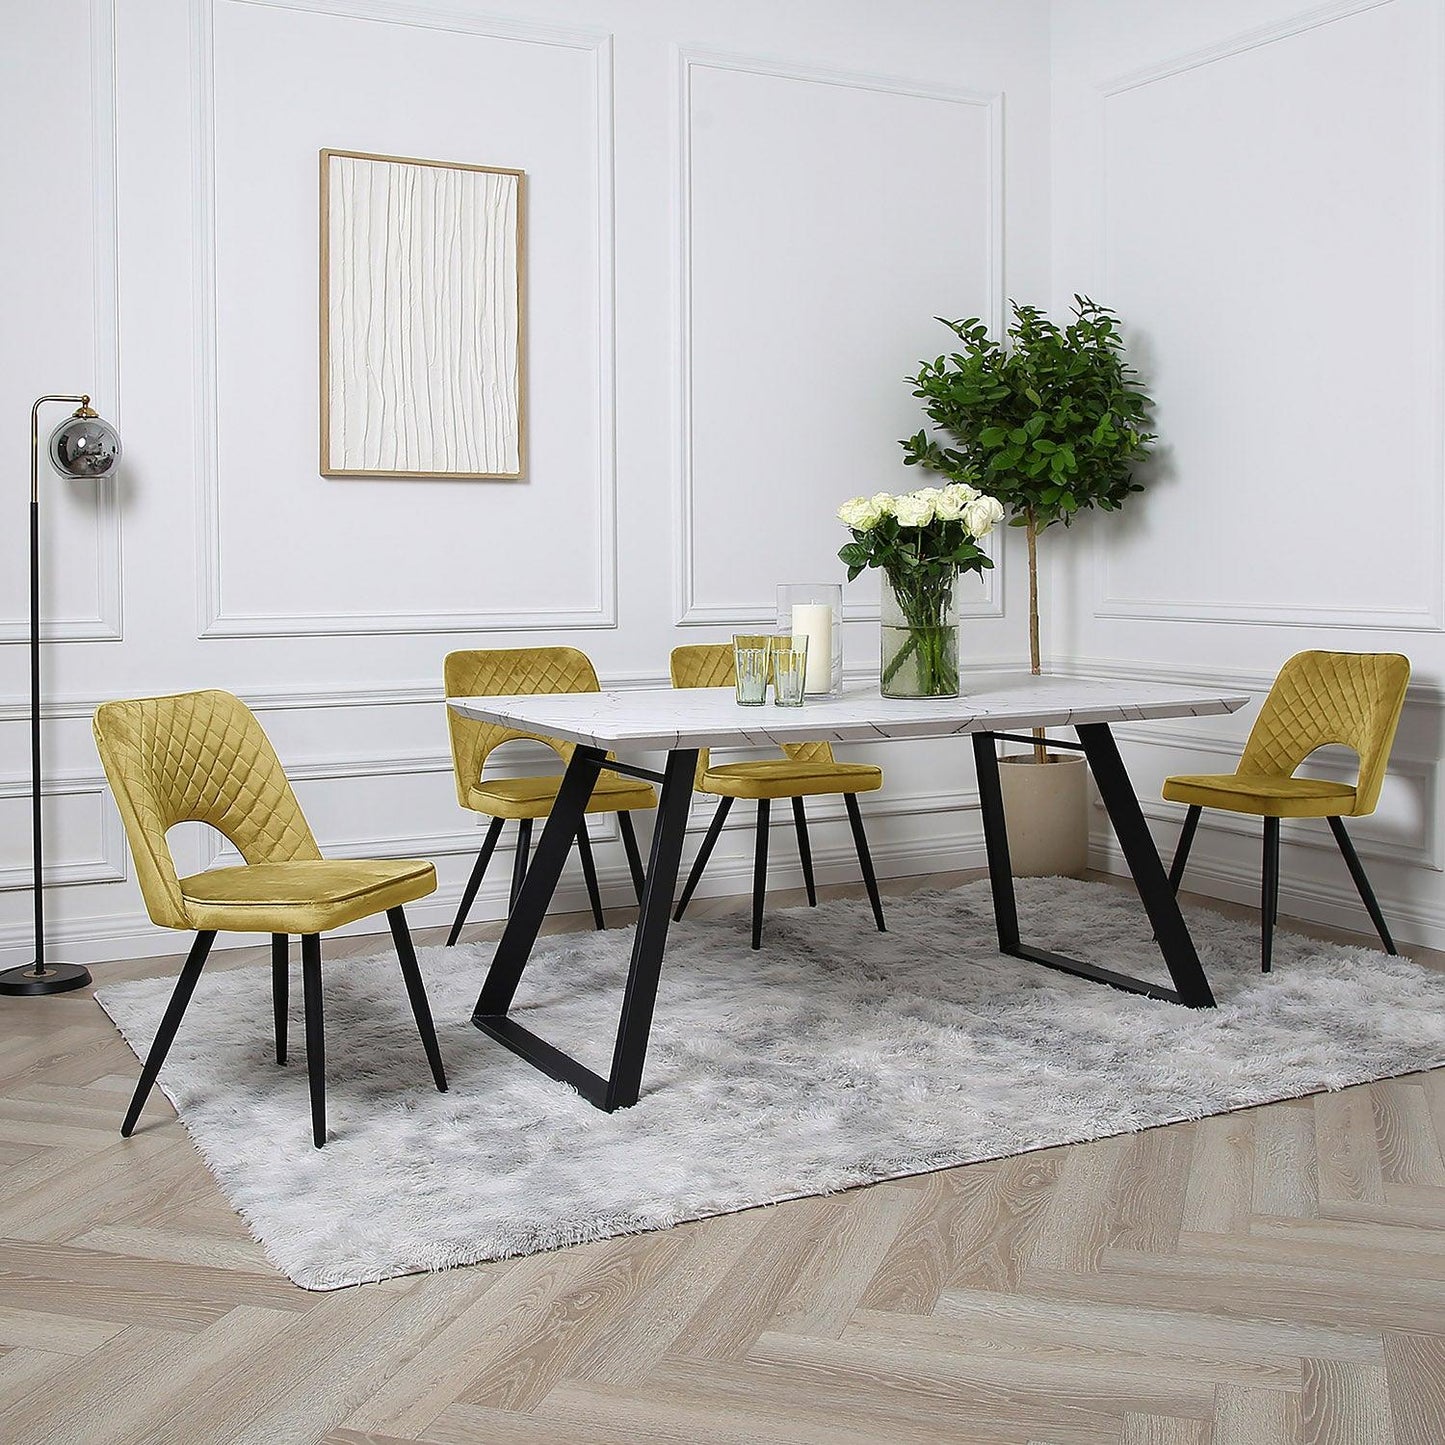 Atlas marble dining table set - 4 seater - yellow dining chairs - Laura James